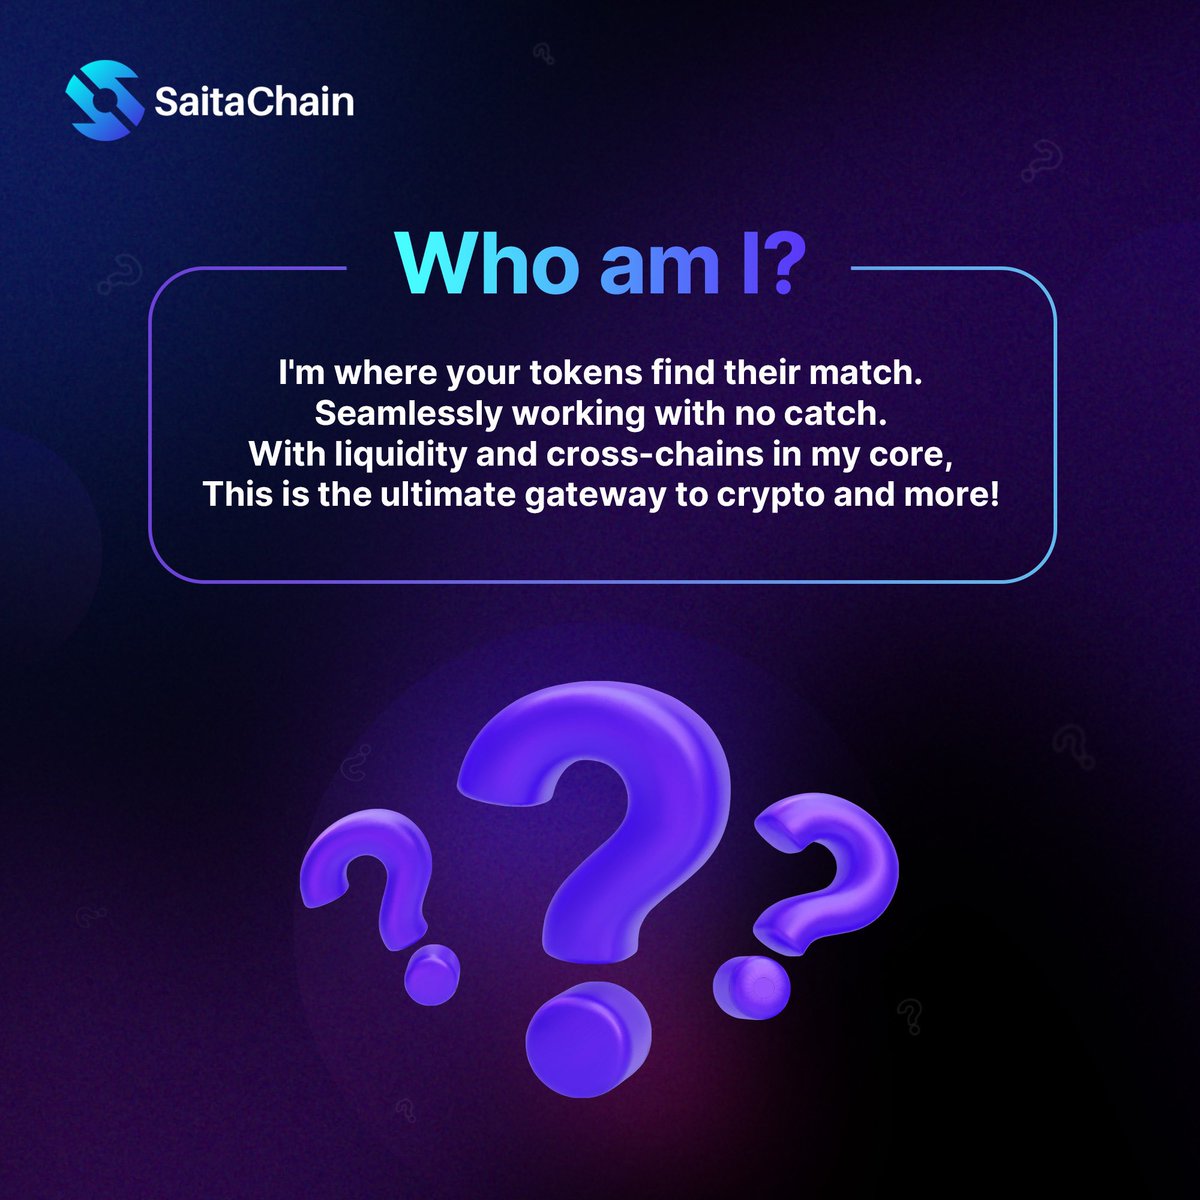 Only sharp #SaitaChain minds will crack this instantly 😏 Comment your answers! 👇🏼 #SaitaChain #Crypto #Riddle